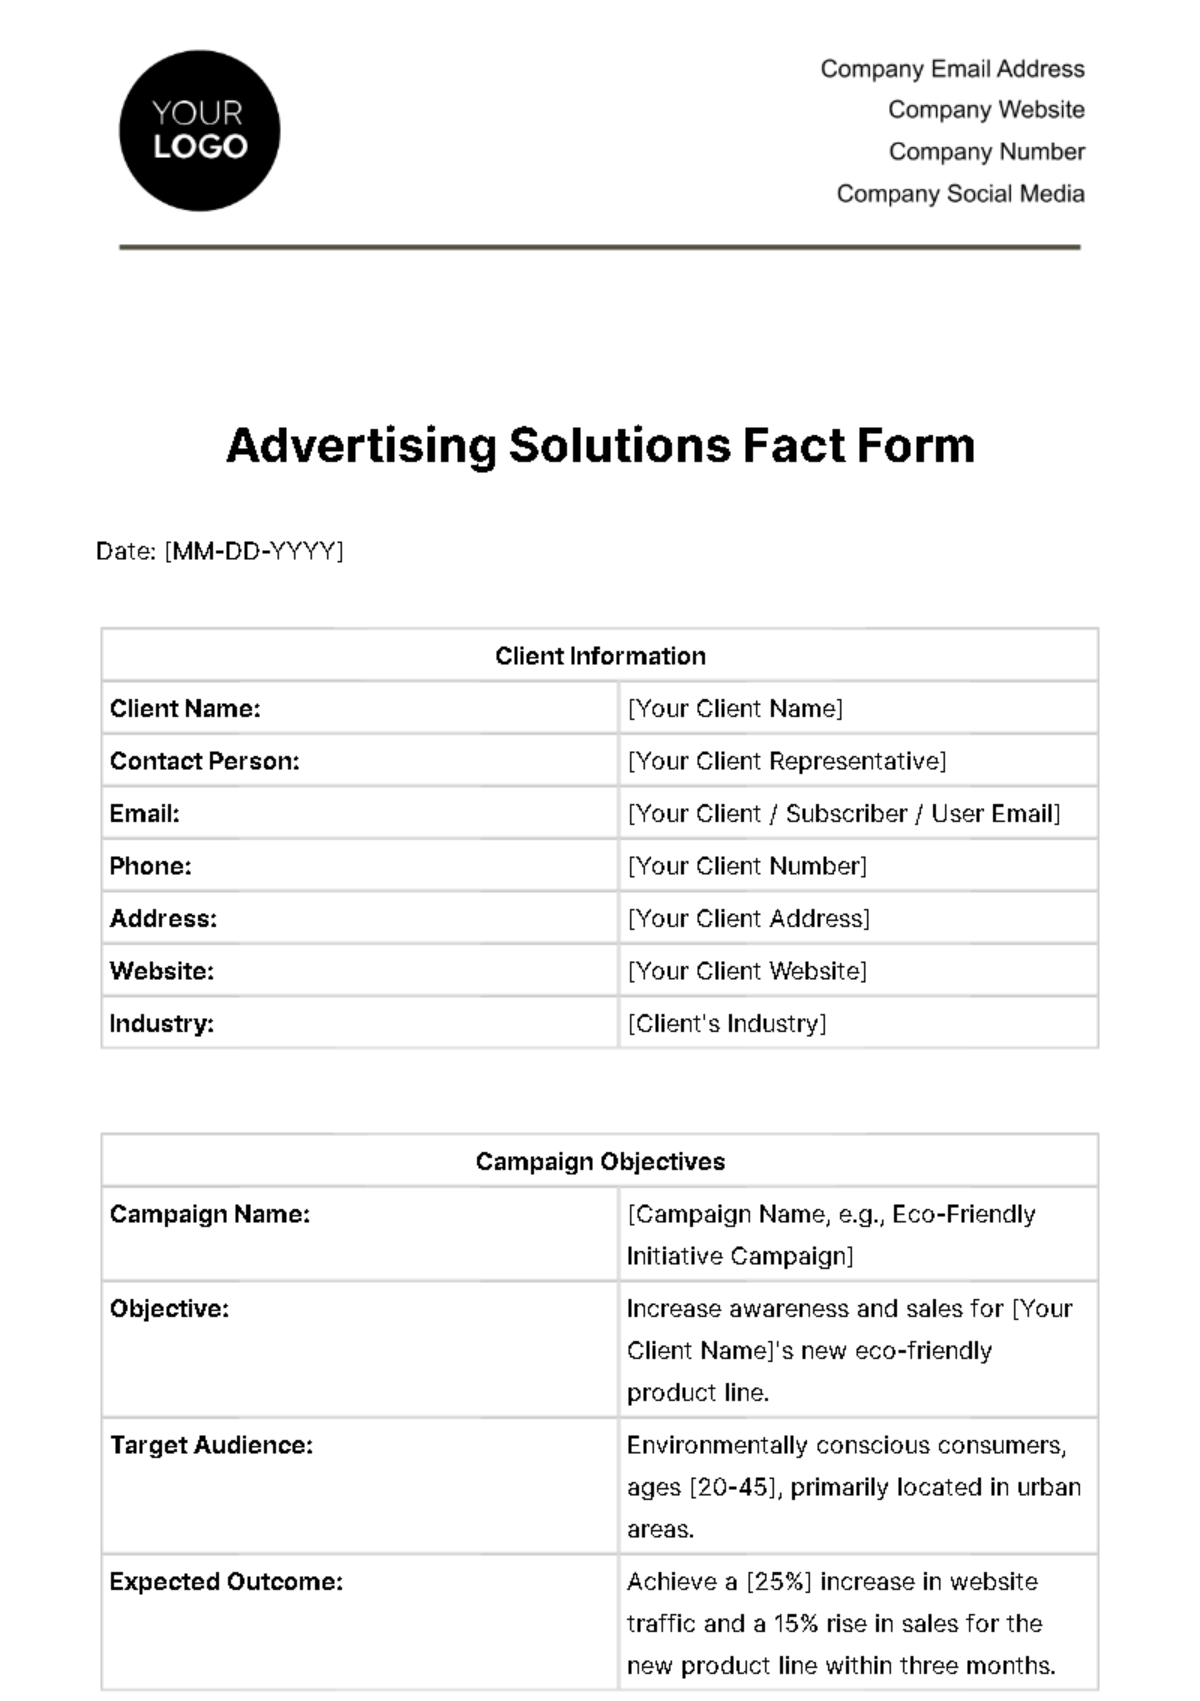 Advertising Solutions Fact Form Template